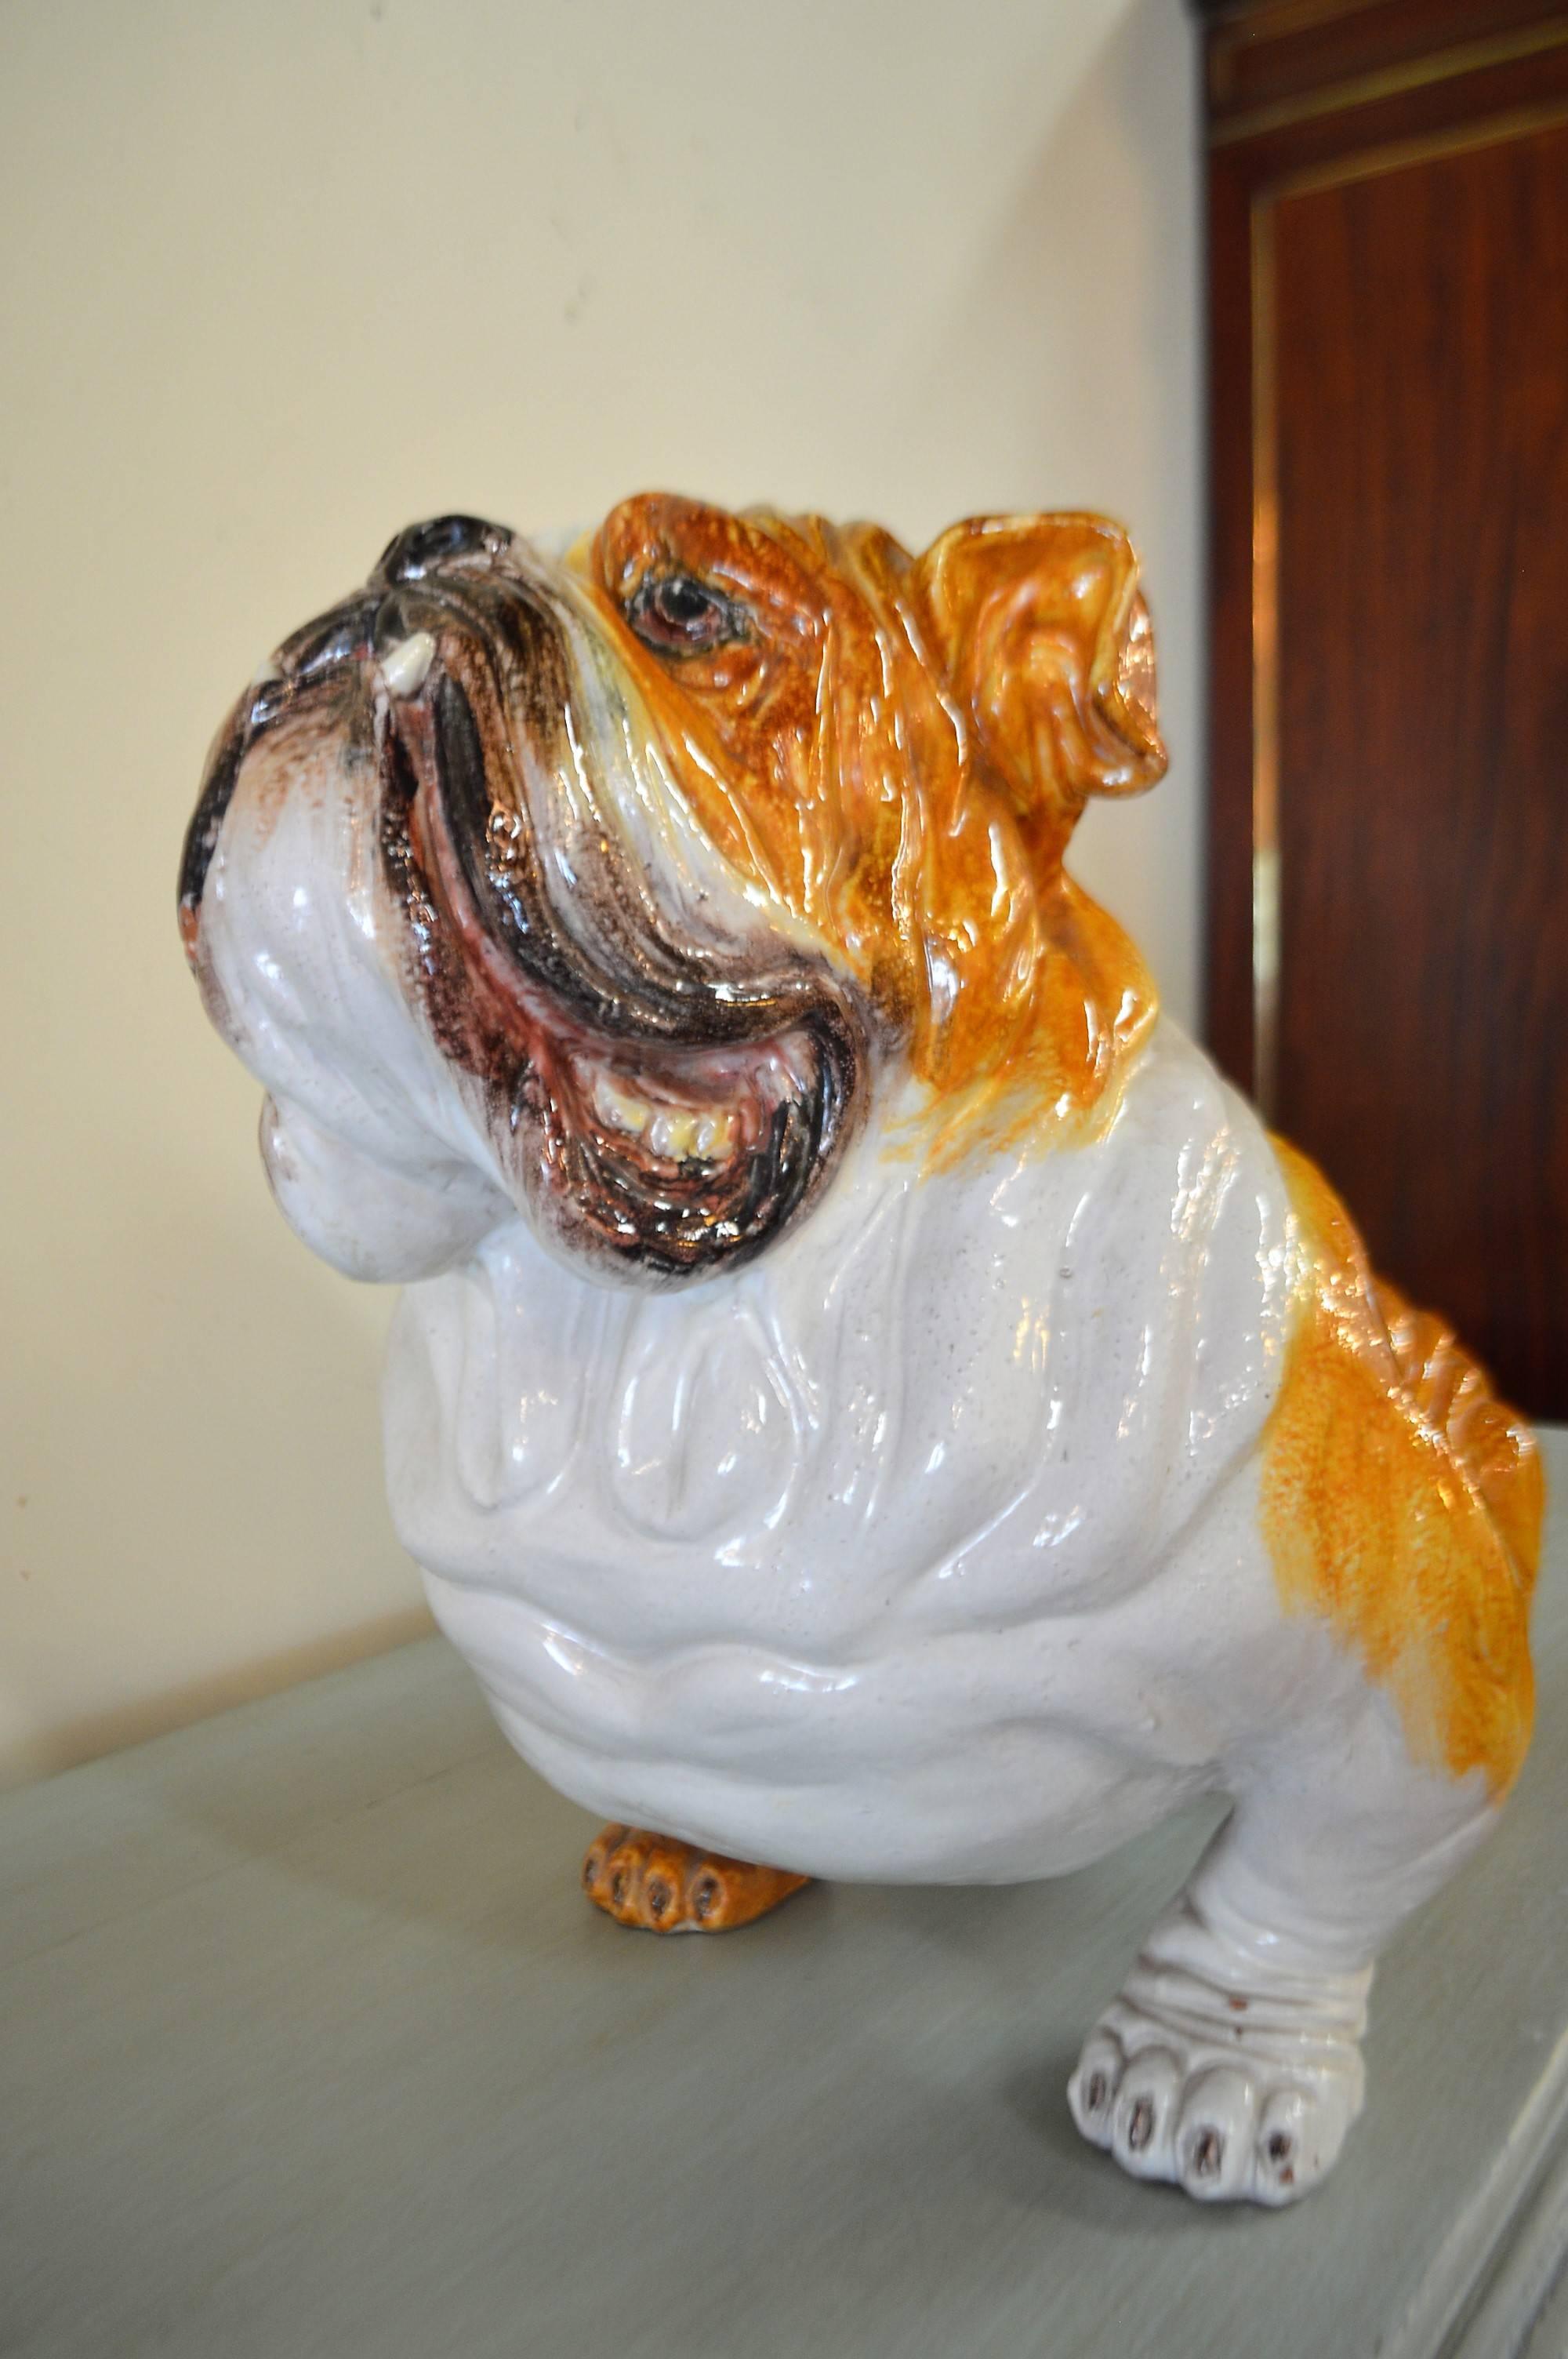 Fine details on the amusing lifesize bulldog, fairly heavy, made in terracotta and finished with a glazed ceramic. The facial expression is very good.